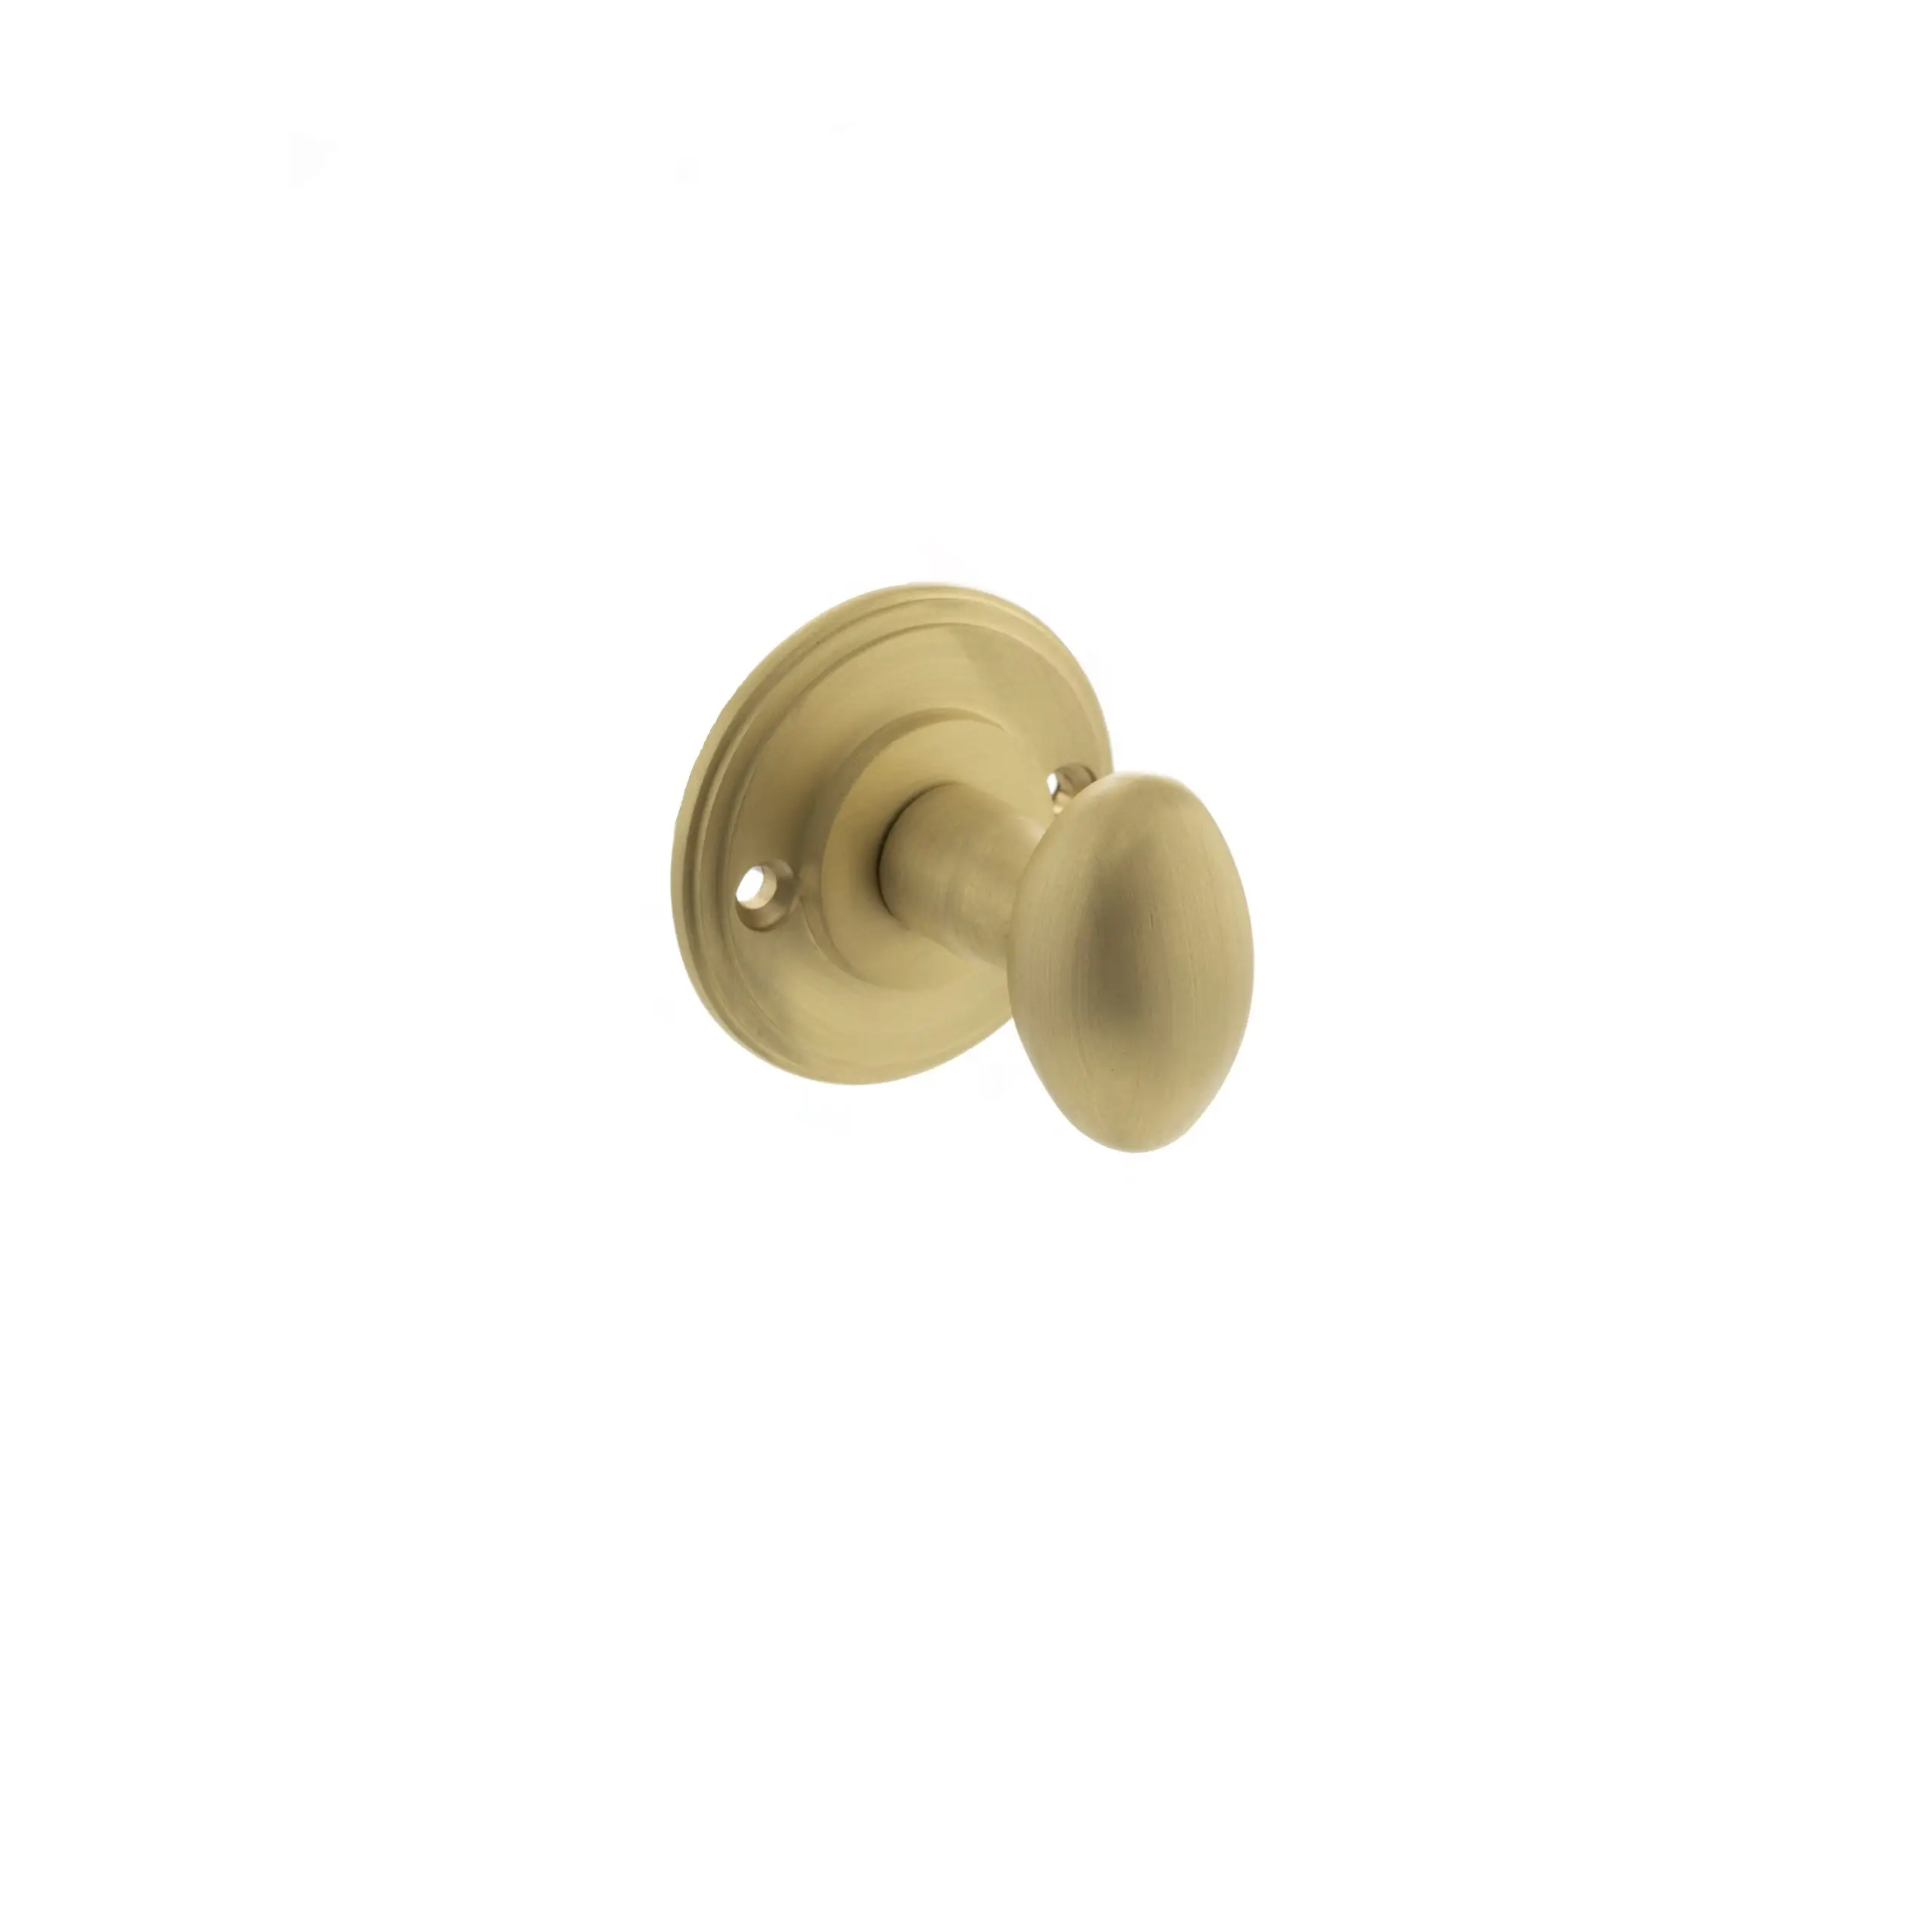 MHOWCSB_MILLHOUSE-BRASS-WC-TURN-TO-SUIT-MORTICE-KNOBS_SATIN-BRASS_1_HR-scaled.jpg